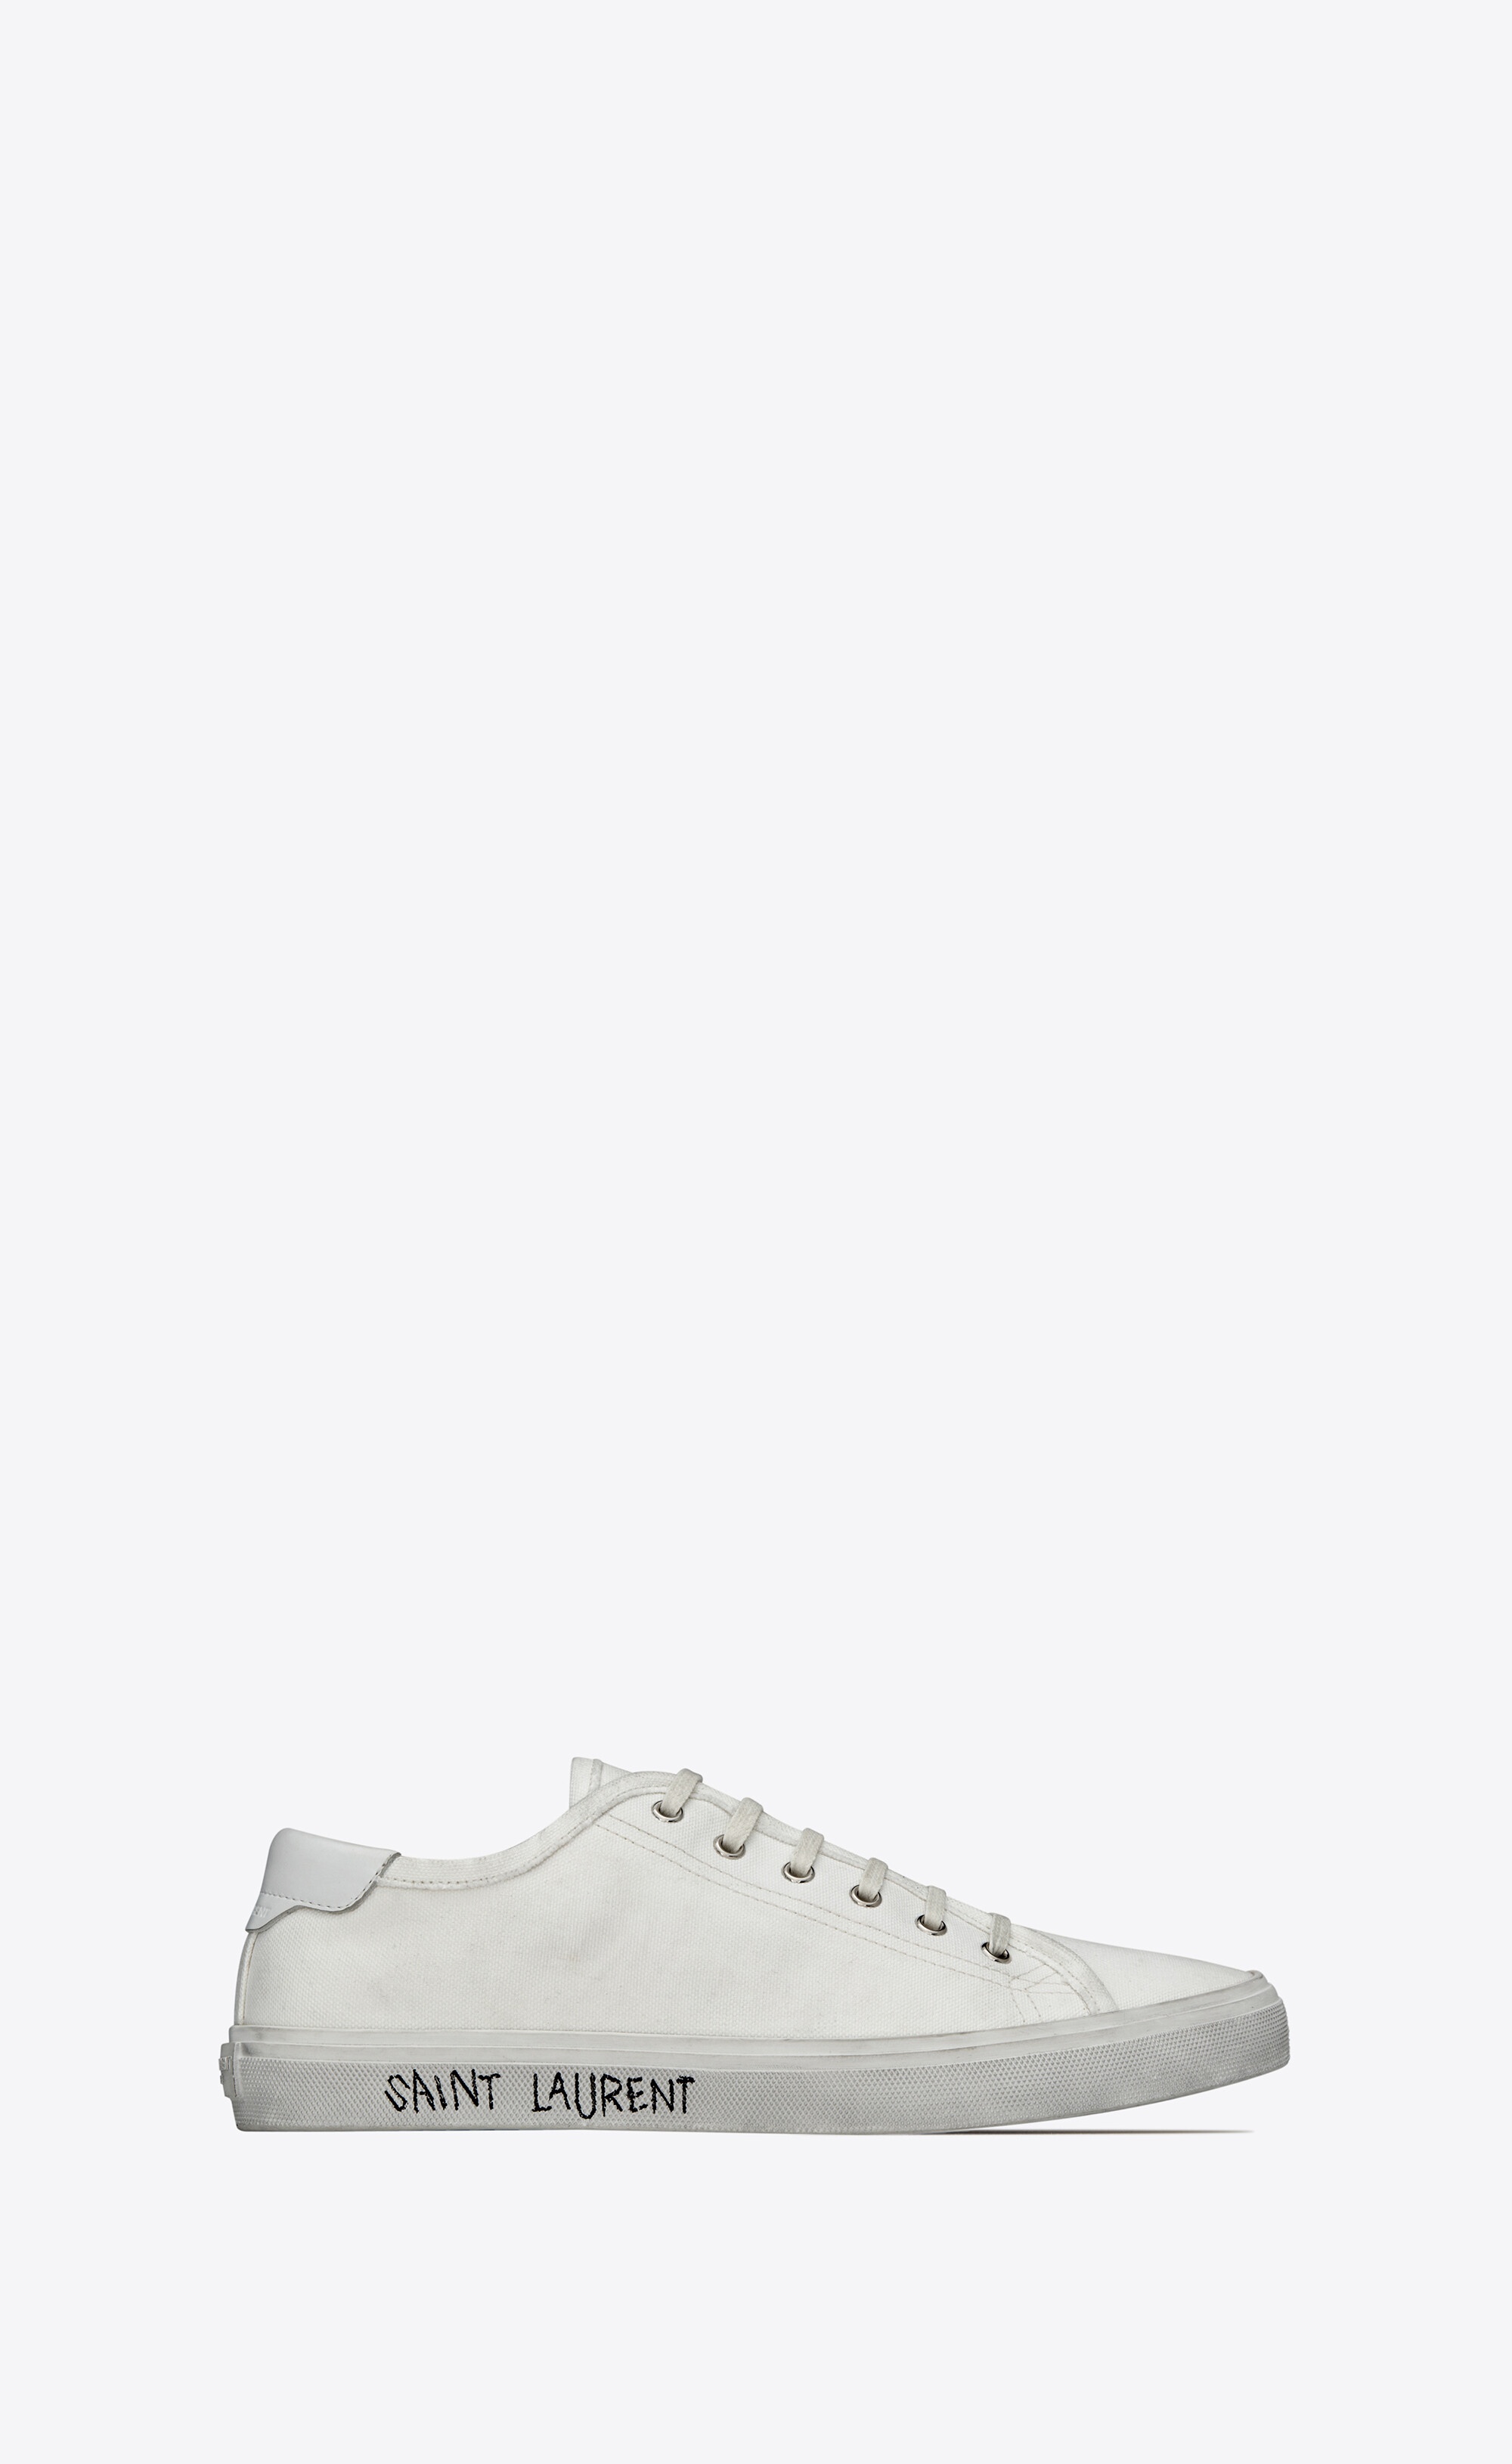 malibu sneakers in canvas and leather - 1